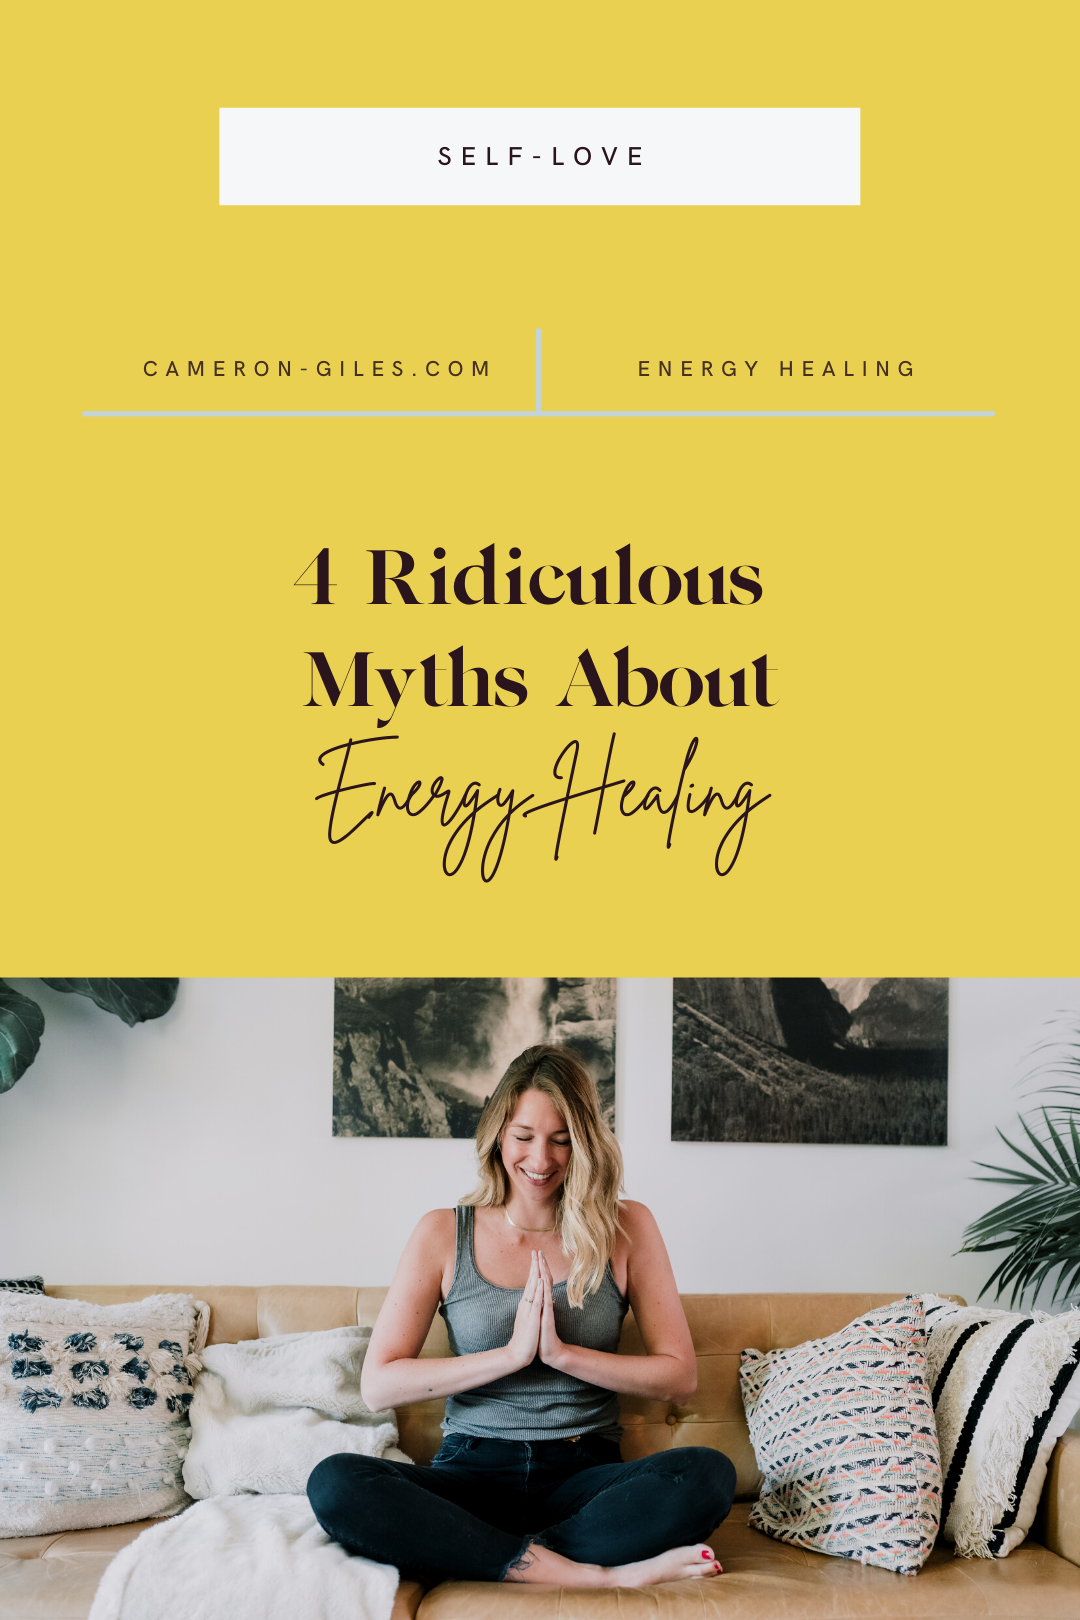 Hi {{ subscriber.first_name }}, Can we clear up some rumors for a minute? Because sometimes I hear about some pretty wild misconceptions about energy healing and I really don’t want you to hold yourself back because of them. So, what ARE these myths? Let me tell you about a few of my “favorites”... Myth #1: A single energy healing session will lead to lasting change in my life and career. My clients all say the one thing they love about sessions with me is that they get results every single time we meet. But in my experience, clients who are willing to commit to themselves and their self-care get the most out of this work. Put it this way, if you haven't seen a yoga mat in over a year, you wouldn't expect to walk out of a single class instantly whipped back into shape. Energy healing works the same way. The best results come with time and consistency. In my experience, four sessions is the minimum for a client to make an energetic shift stick. You’ll feel great after your first session, but with no follow-up, the good feeling will start to fade over time. Revisiting our work from previous sessions and building on it will lead to lasting change. Myth #2: Energy healing isn’t as effective over Zoom as it is in-person. Probably the most convenient thing about energy healing is, whether you’re two inches or two thousand miles away, it works exactly the same way! I don’t need to be in the same room with you to thoroughly examine your energy fields or cleanse and rebalance them, just the same way you don’t have to be in the same room with a loved one to know how they feel about you or if they’re thinking of you. It’s all…energy! Click here to check out some words from my clients specifically about their experiences working with me long-distance. Myth #3: Regular energy healing is expensive. Spoiler alert: You’re the safest bet in town. Investing in yourself will yield the highest return, every single time. And while energy healing isn’t free, I offer multiple payment options to make each program work for you. What happens if you don’t see a payment option that works for your needs? Not a problem! I’m always open to proposals. If there’s anything I can do to develop a payment plan that works with your budget, do let me know. You can email me at love@cameron-giles.com with questions. Myth #4: Energy healing is about telling my future, like a fortune teller. Intuitive energy healing does not examine your future. In fact, I don’t ever intentionally look into the future because it’s intangible, impermanent, and always changing. Energy healing is the best way I know to remove the blocks preventing you from getting exactly where you want to go TODAY, in present time. And I can’t tell your fortune…at least not in the traditional way. Here’s what I can tell you about your future: it is 100% determined by the actions you take today. While the results are reliable (clear energy, a tangible shift), there’s always something a little unexpected that emerges in each session, usually something you didn’t know about yourself that’s super exciting and opens up new possibilities that you could never come up with linear thinking alone. Please don’t wait for the shifts you’re craving to spontaneously occur. My mission is to help you stop wasting your energy on indecision, self-doubt, and distractions and start spending it on what really matters to you. In short, I’ll show you what you can’t see, so you can release the things that are blocking you and fill that space with calm, clarity, peace, and love. If you want to get the best results possible, I’m excited to introduce a special 3-session starter package for new clients only, custom-tailored to your unique and specific needs.  Let THIS be the month that you finally become the change you seek. xoxo Cameron Love Glow Intuitive Energy Healing | cameron-giles.com